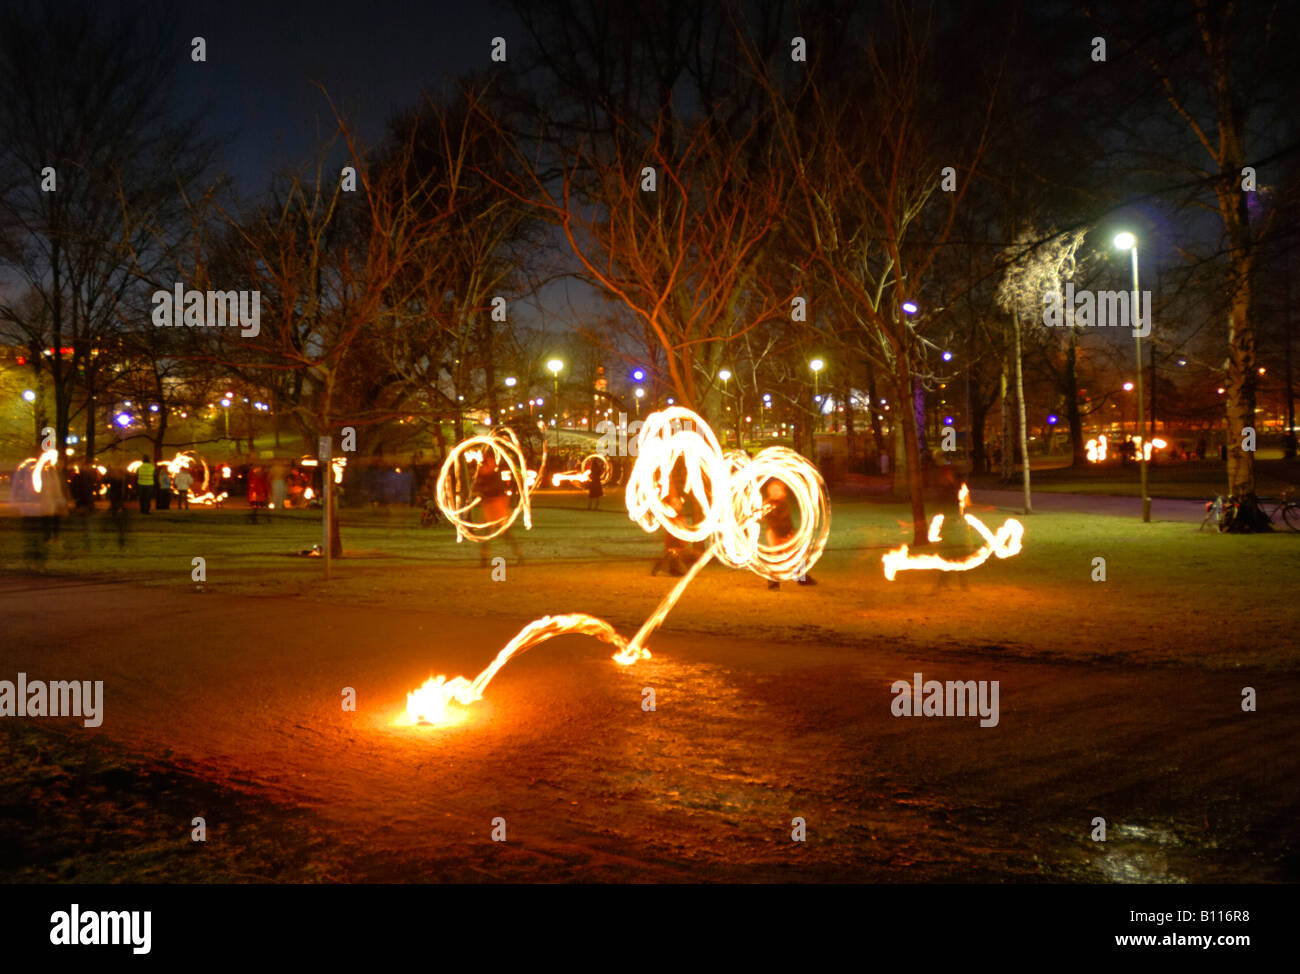 The nighttime firedancers in the Kaisaniemi park, Helsinki, Finland, Europe. 'Oops, a flying torch!' Stock Photo